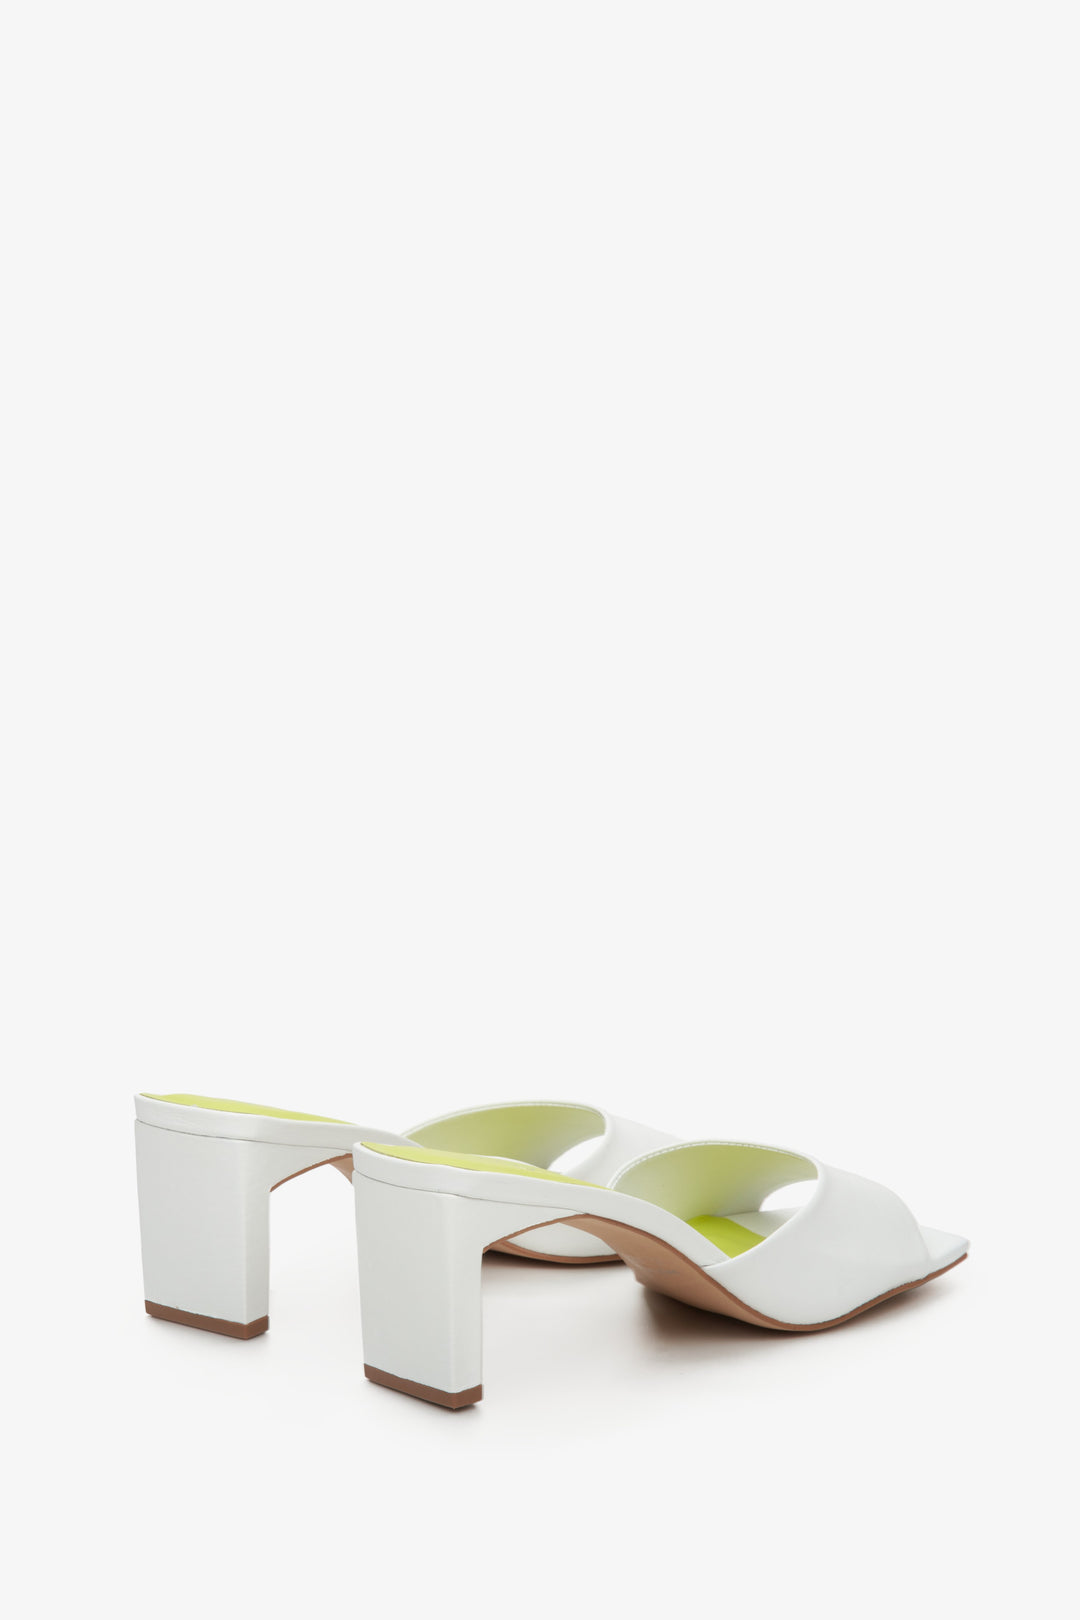 Women's white Estro mules made of Italian genuine leather with a sturdy heel.